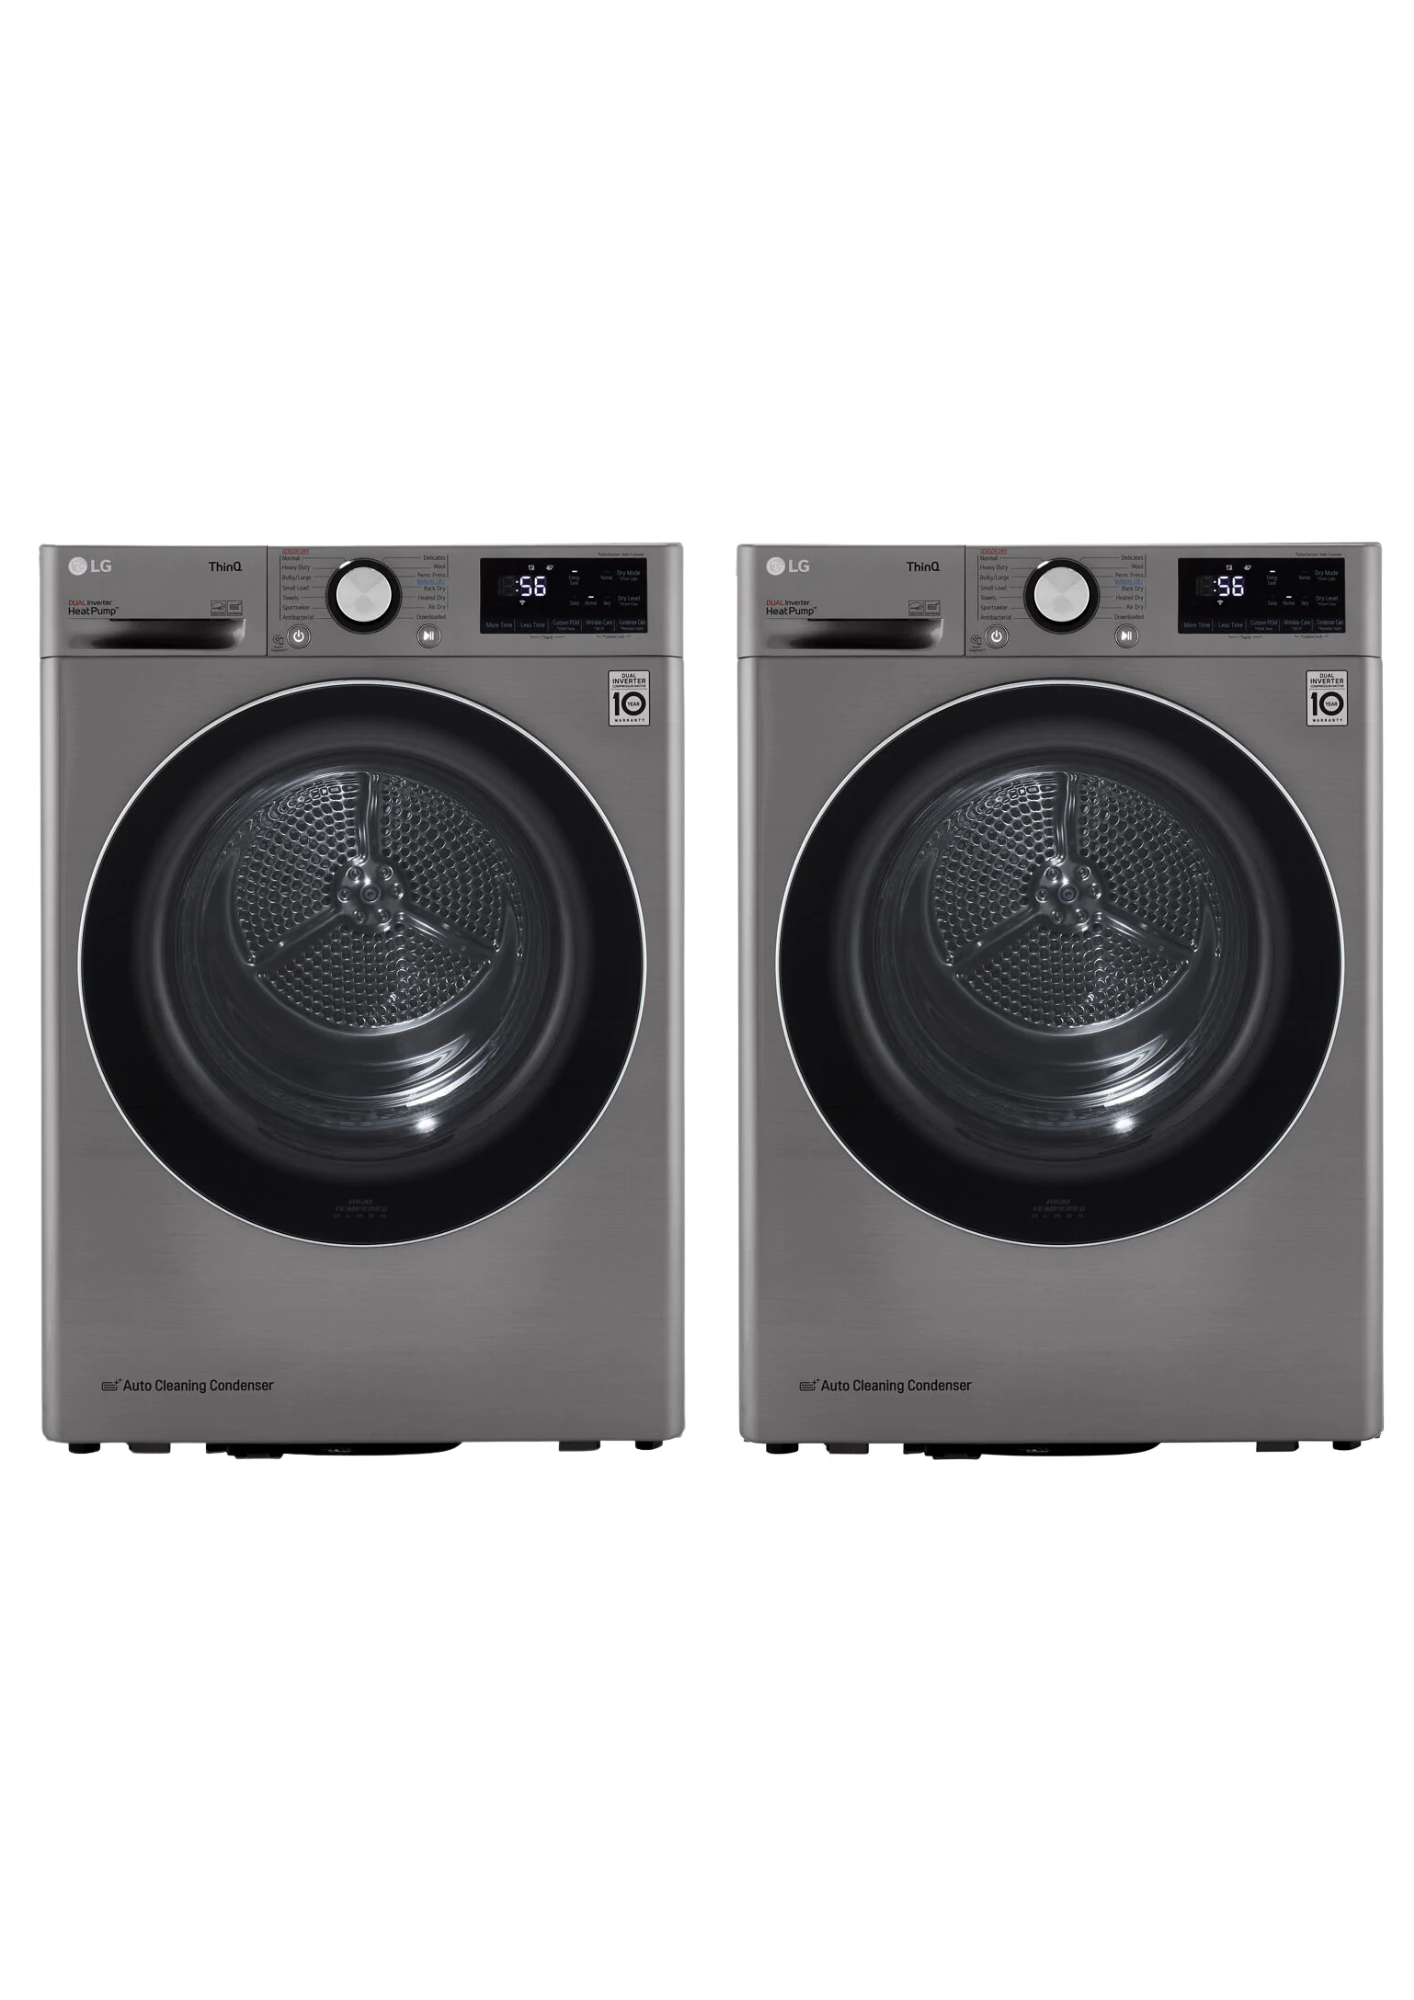 LG 27 Inch Top Load Washer with TurboWash in Graphite Steel